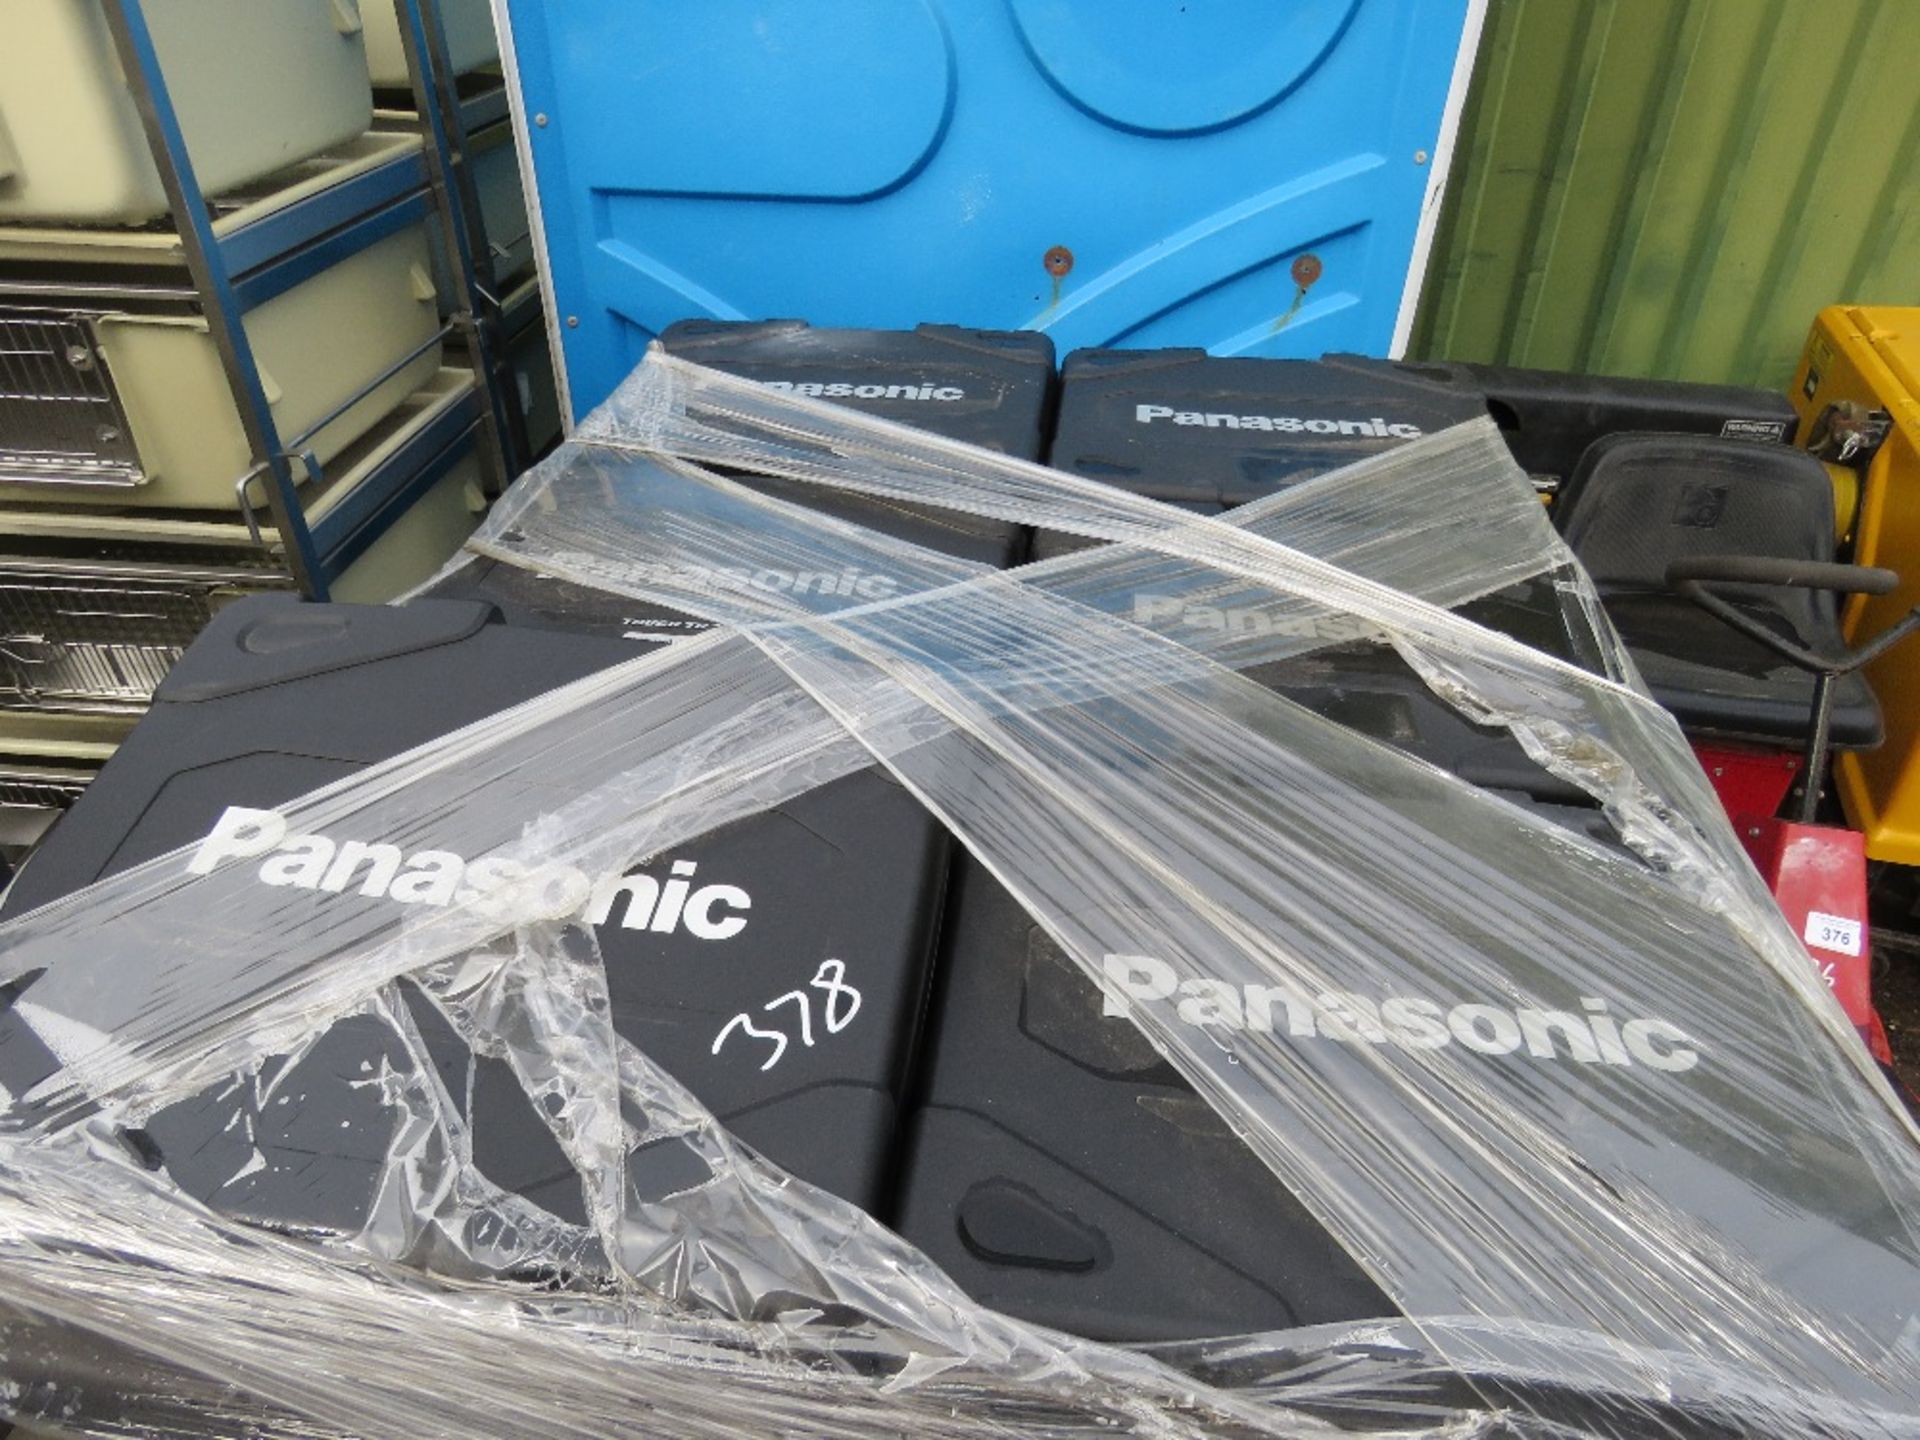 LARGE PALLET OF PANASONIC POWER TOOL BOXES, APPEAR UNUSED. - Image 2 of 2